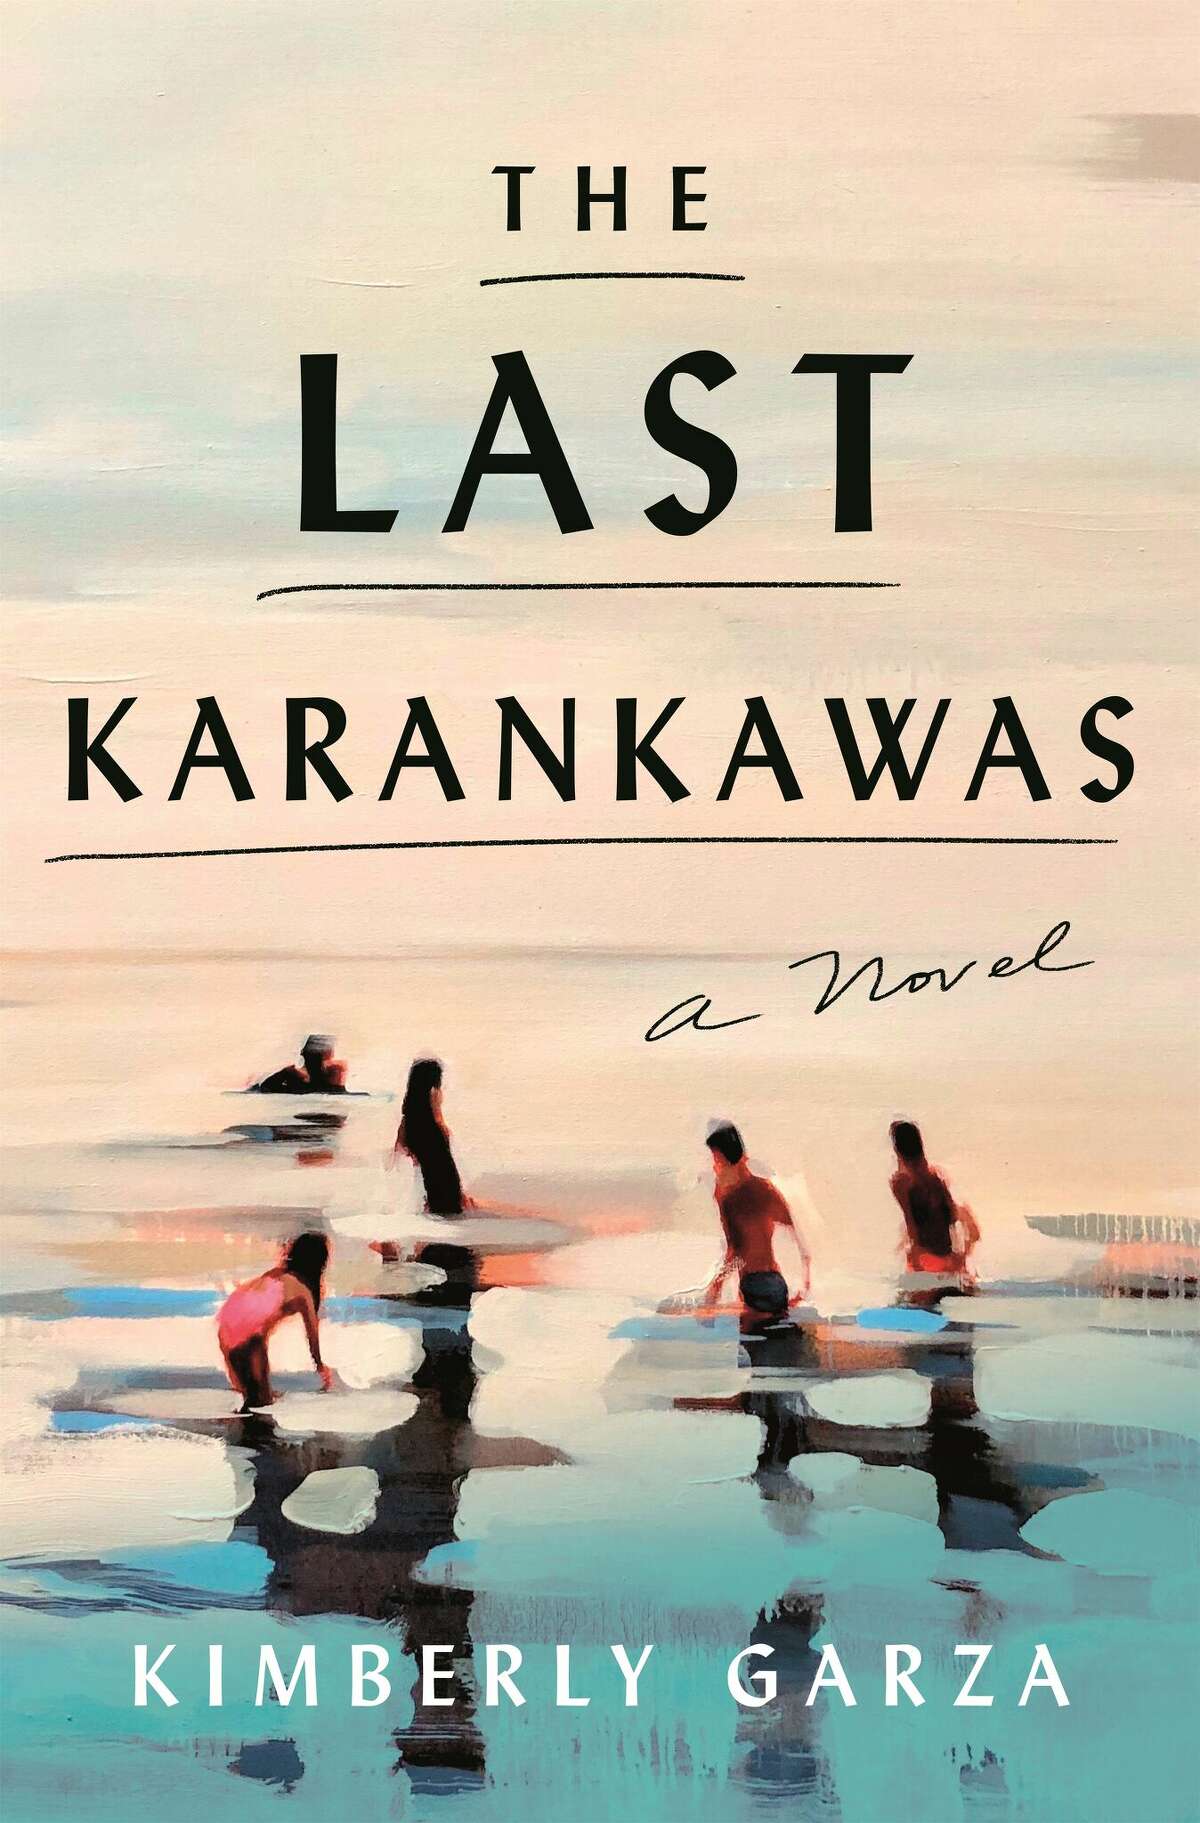 Kimberly Garza's short story grew into The Last Karankawas, her debut novel, which was published last August.